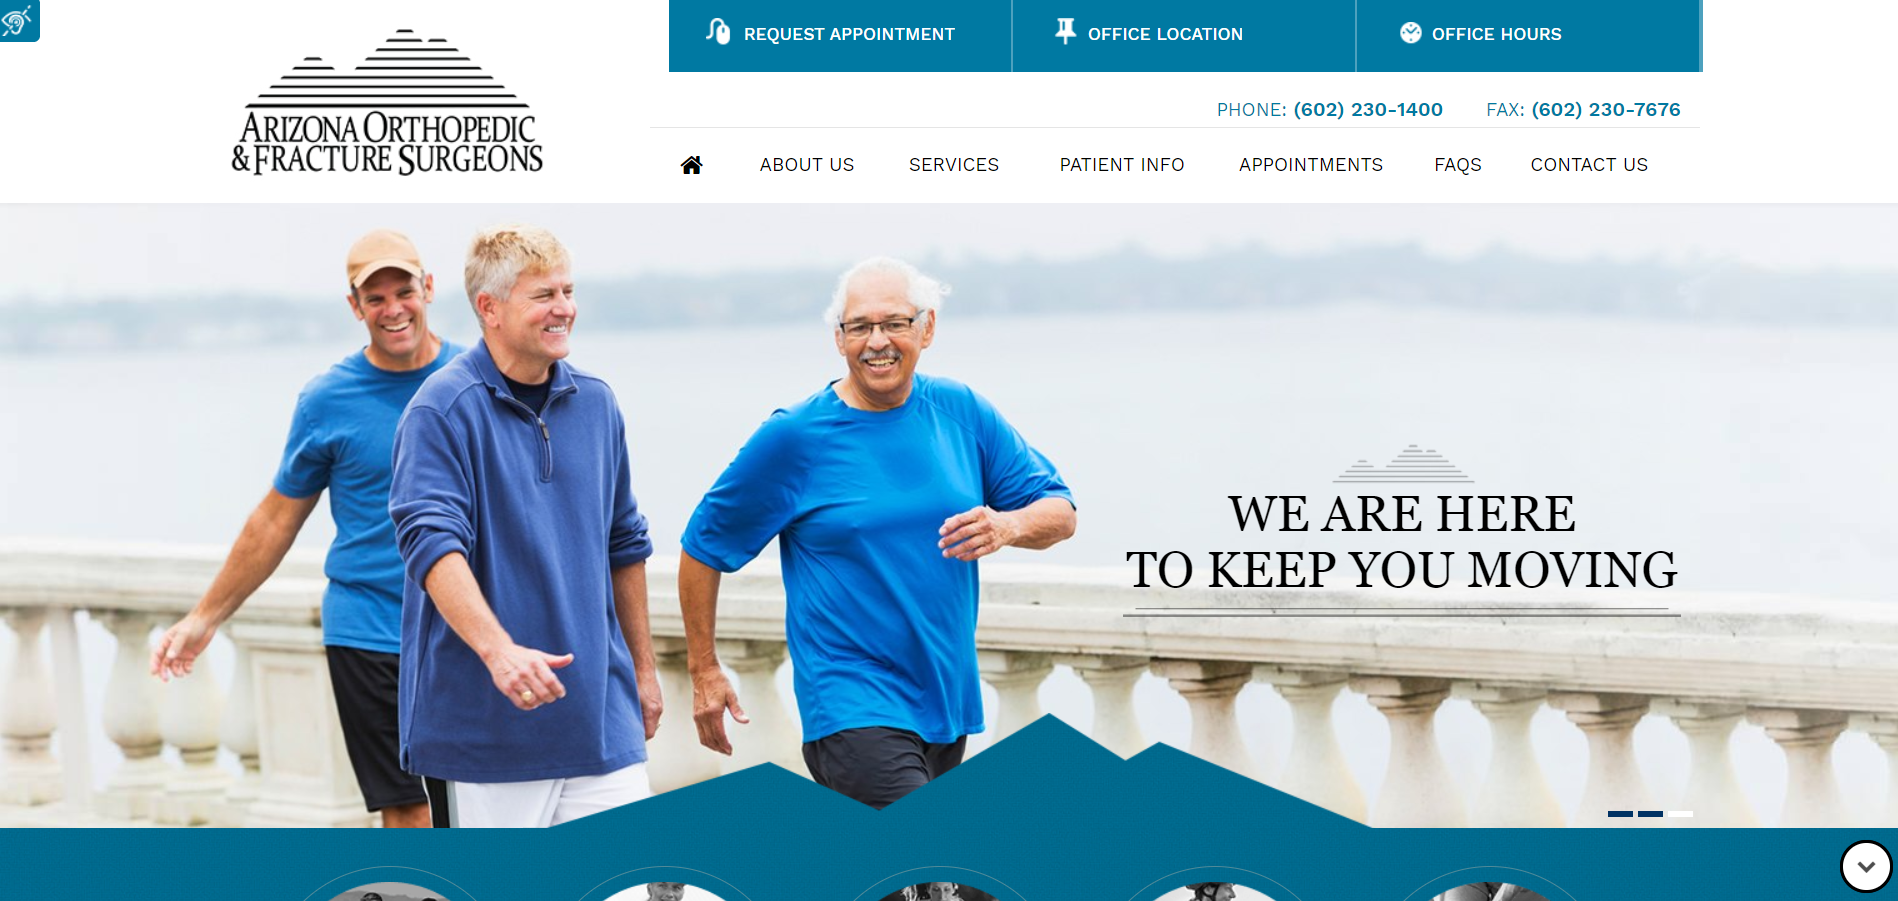 The home page of the Arizona Orthopedic and Fracture Surgeons website, which depicts mountain-shaped graphics and elderly patients exercising 